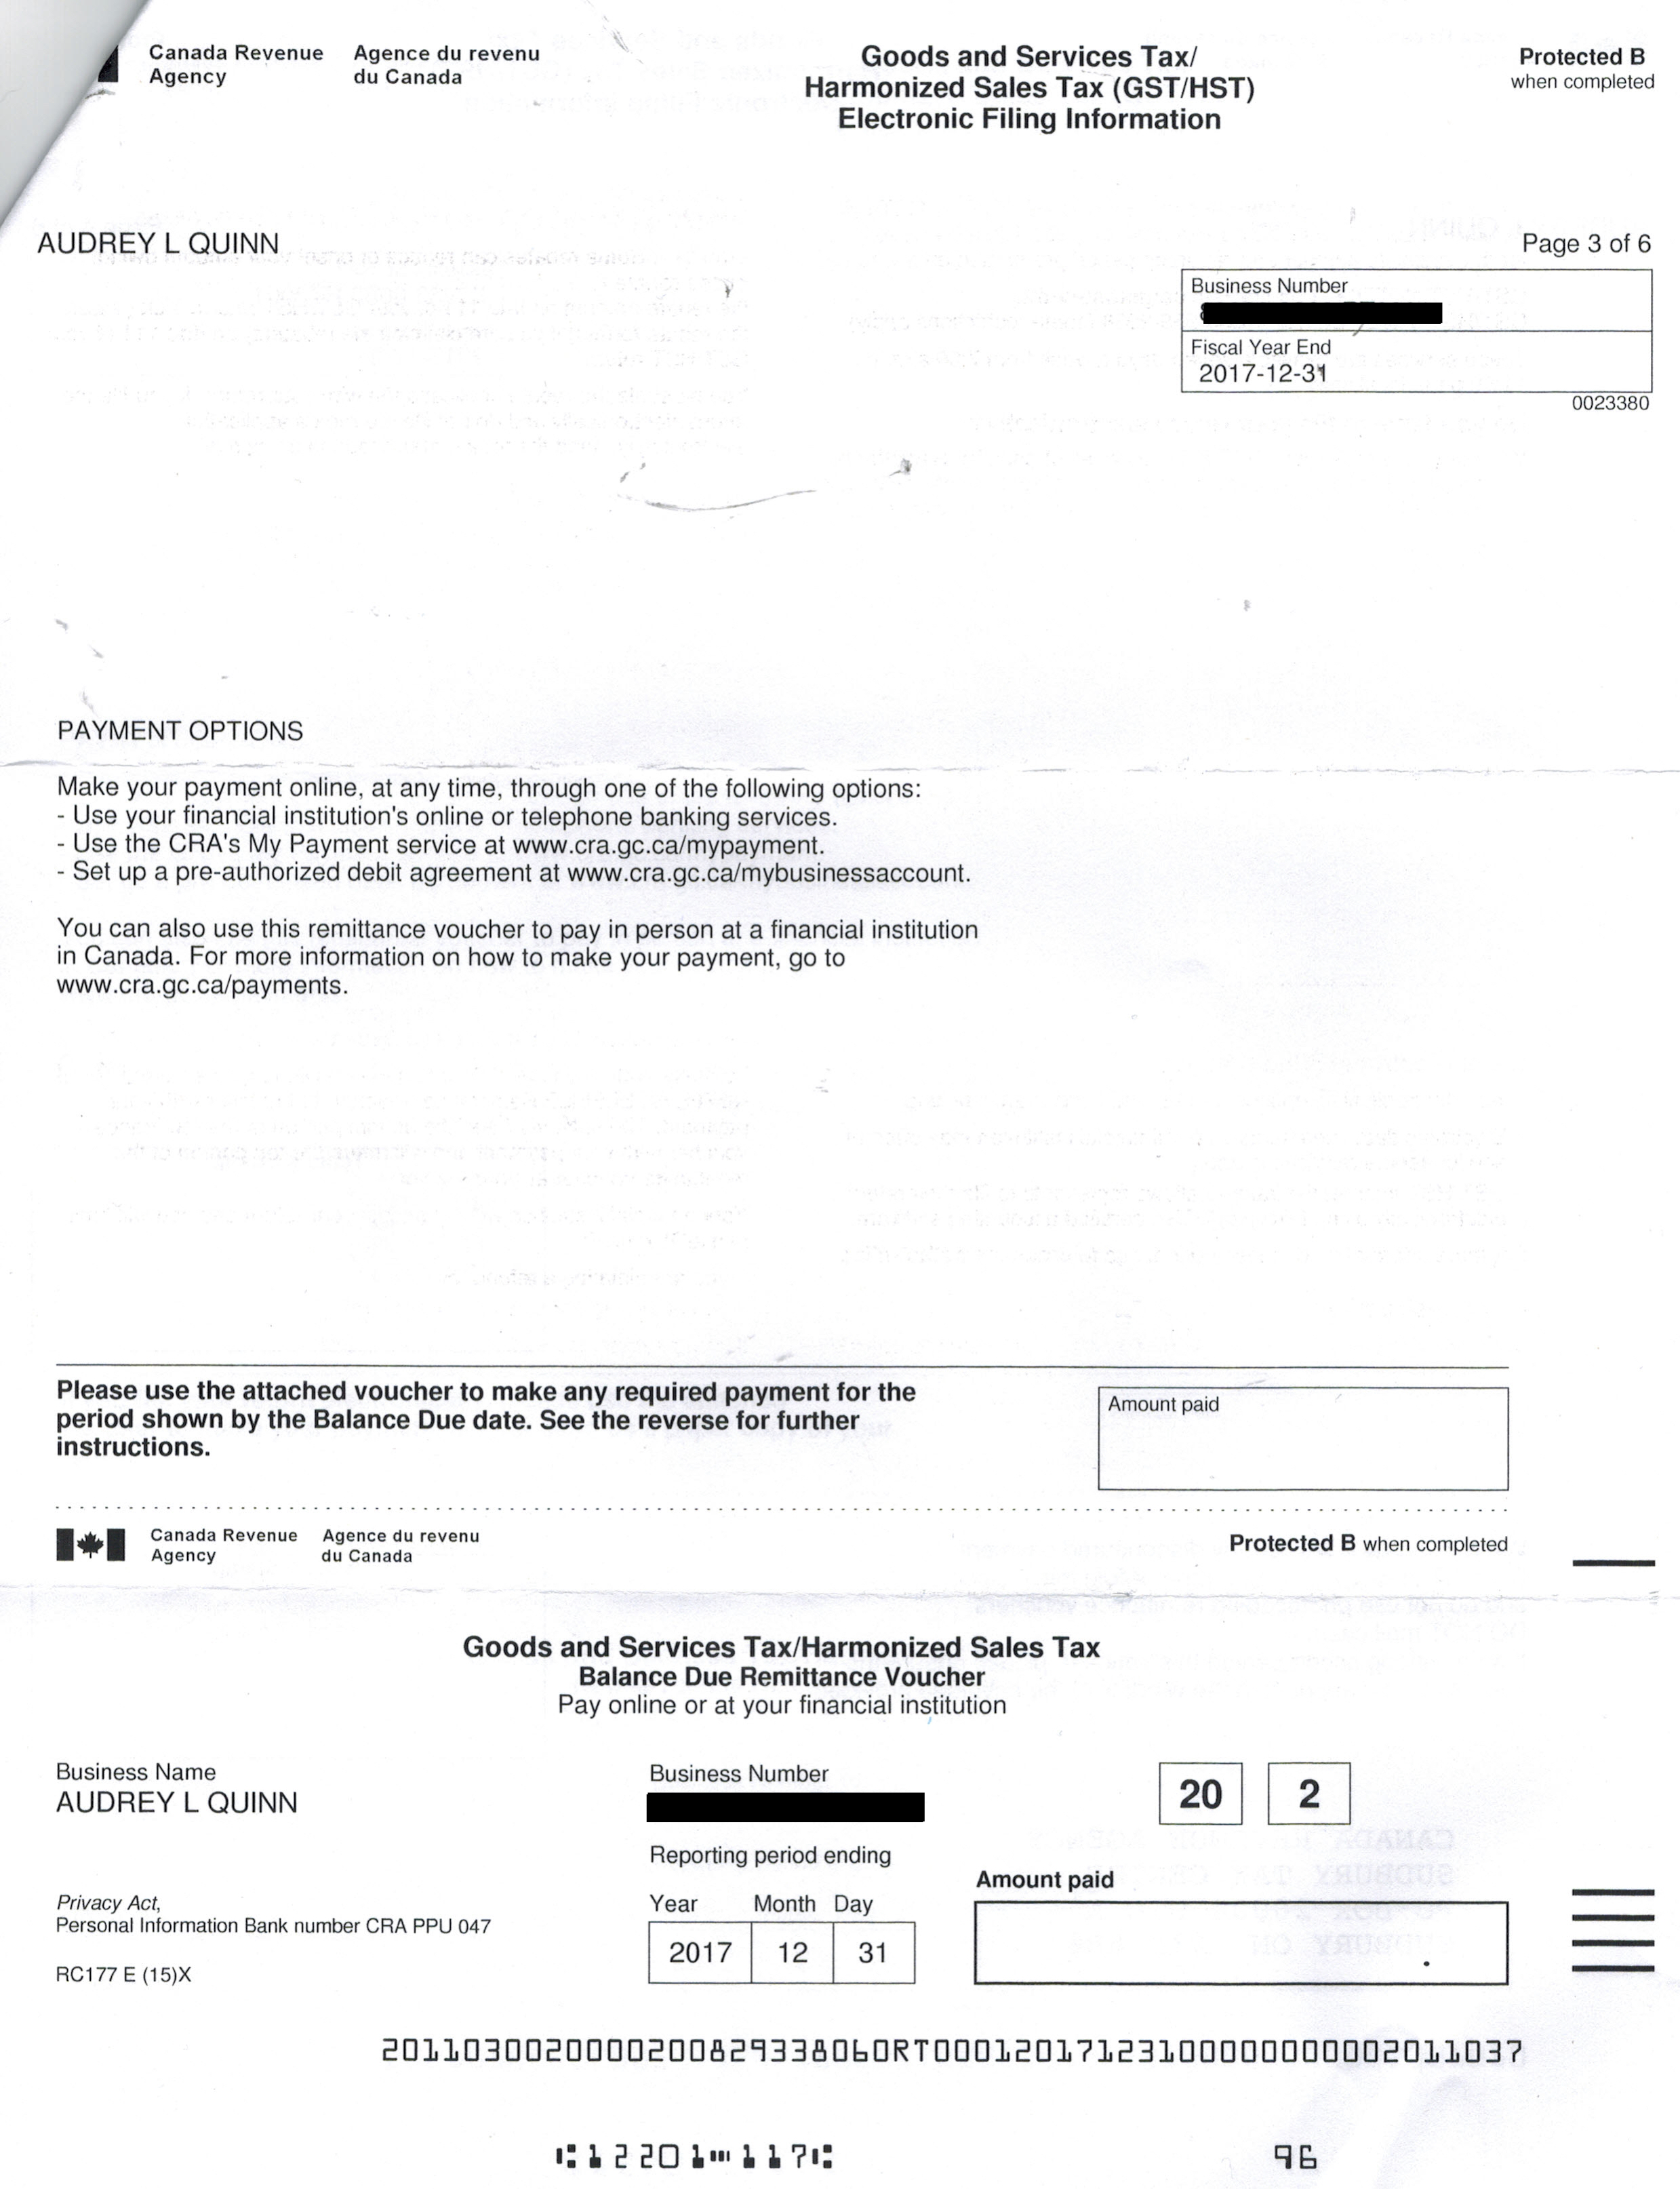 A redacted remittance slip showing payment options from the CRA